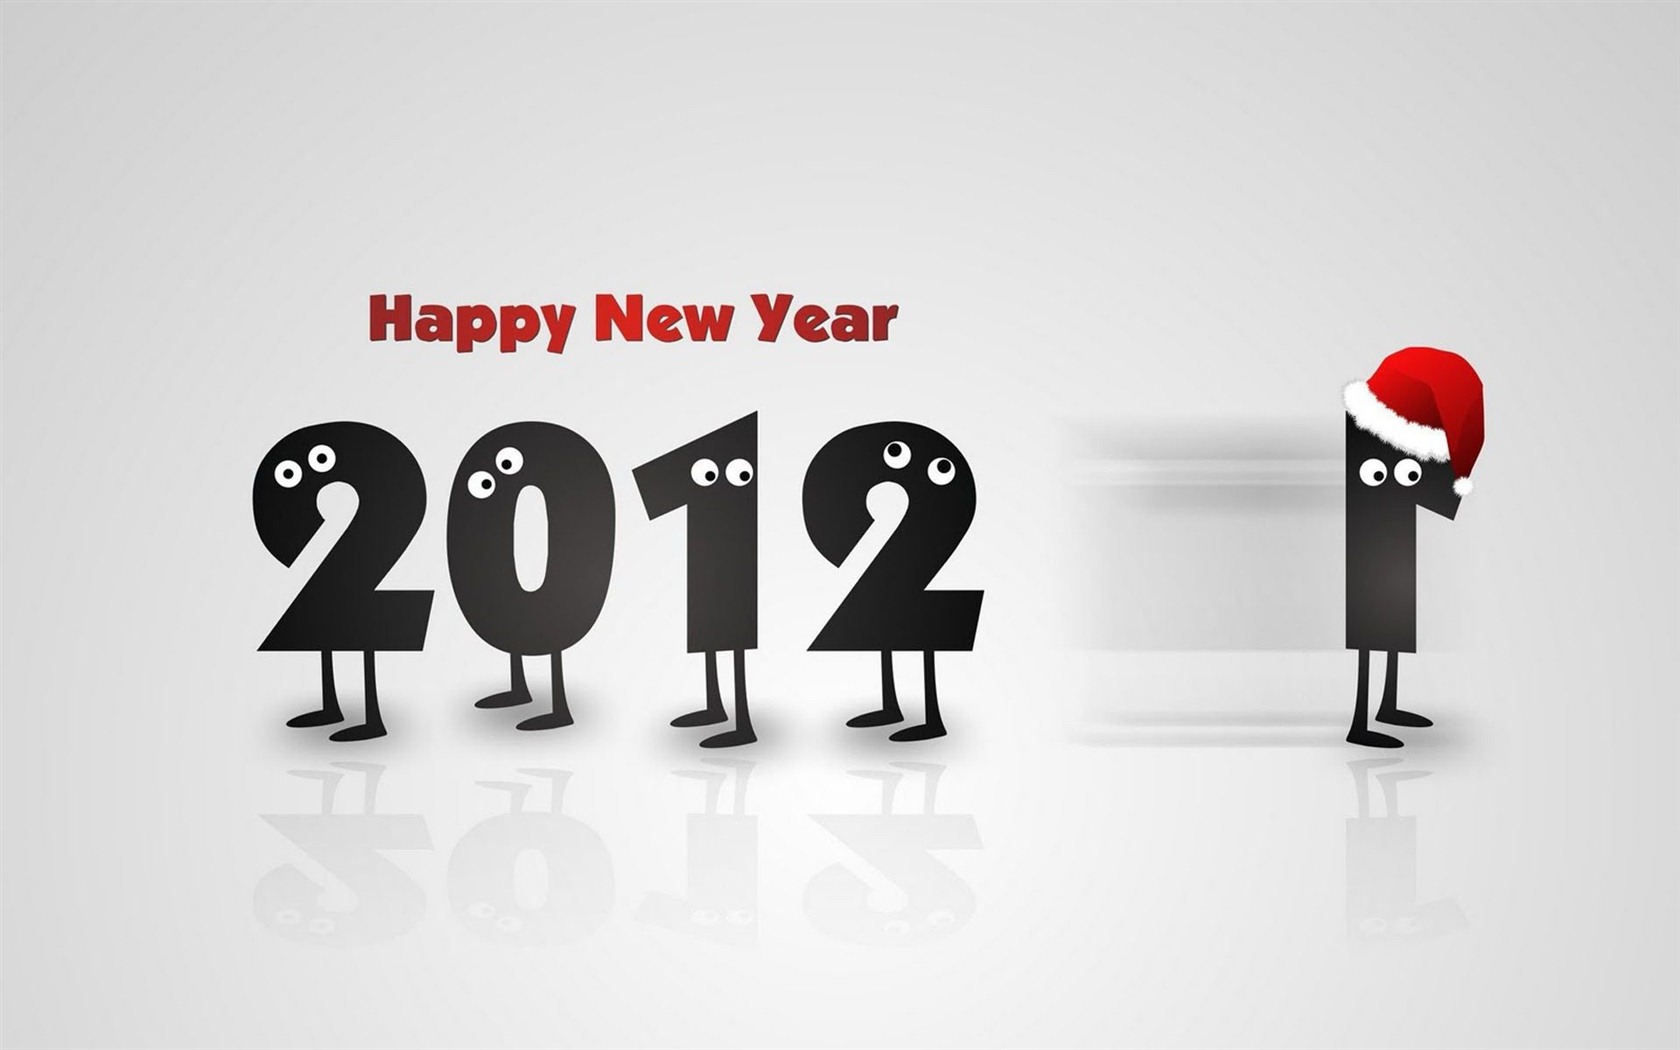 2012 New Year wallpapers (2) #19 - 1680x1050